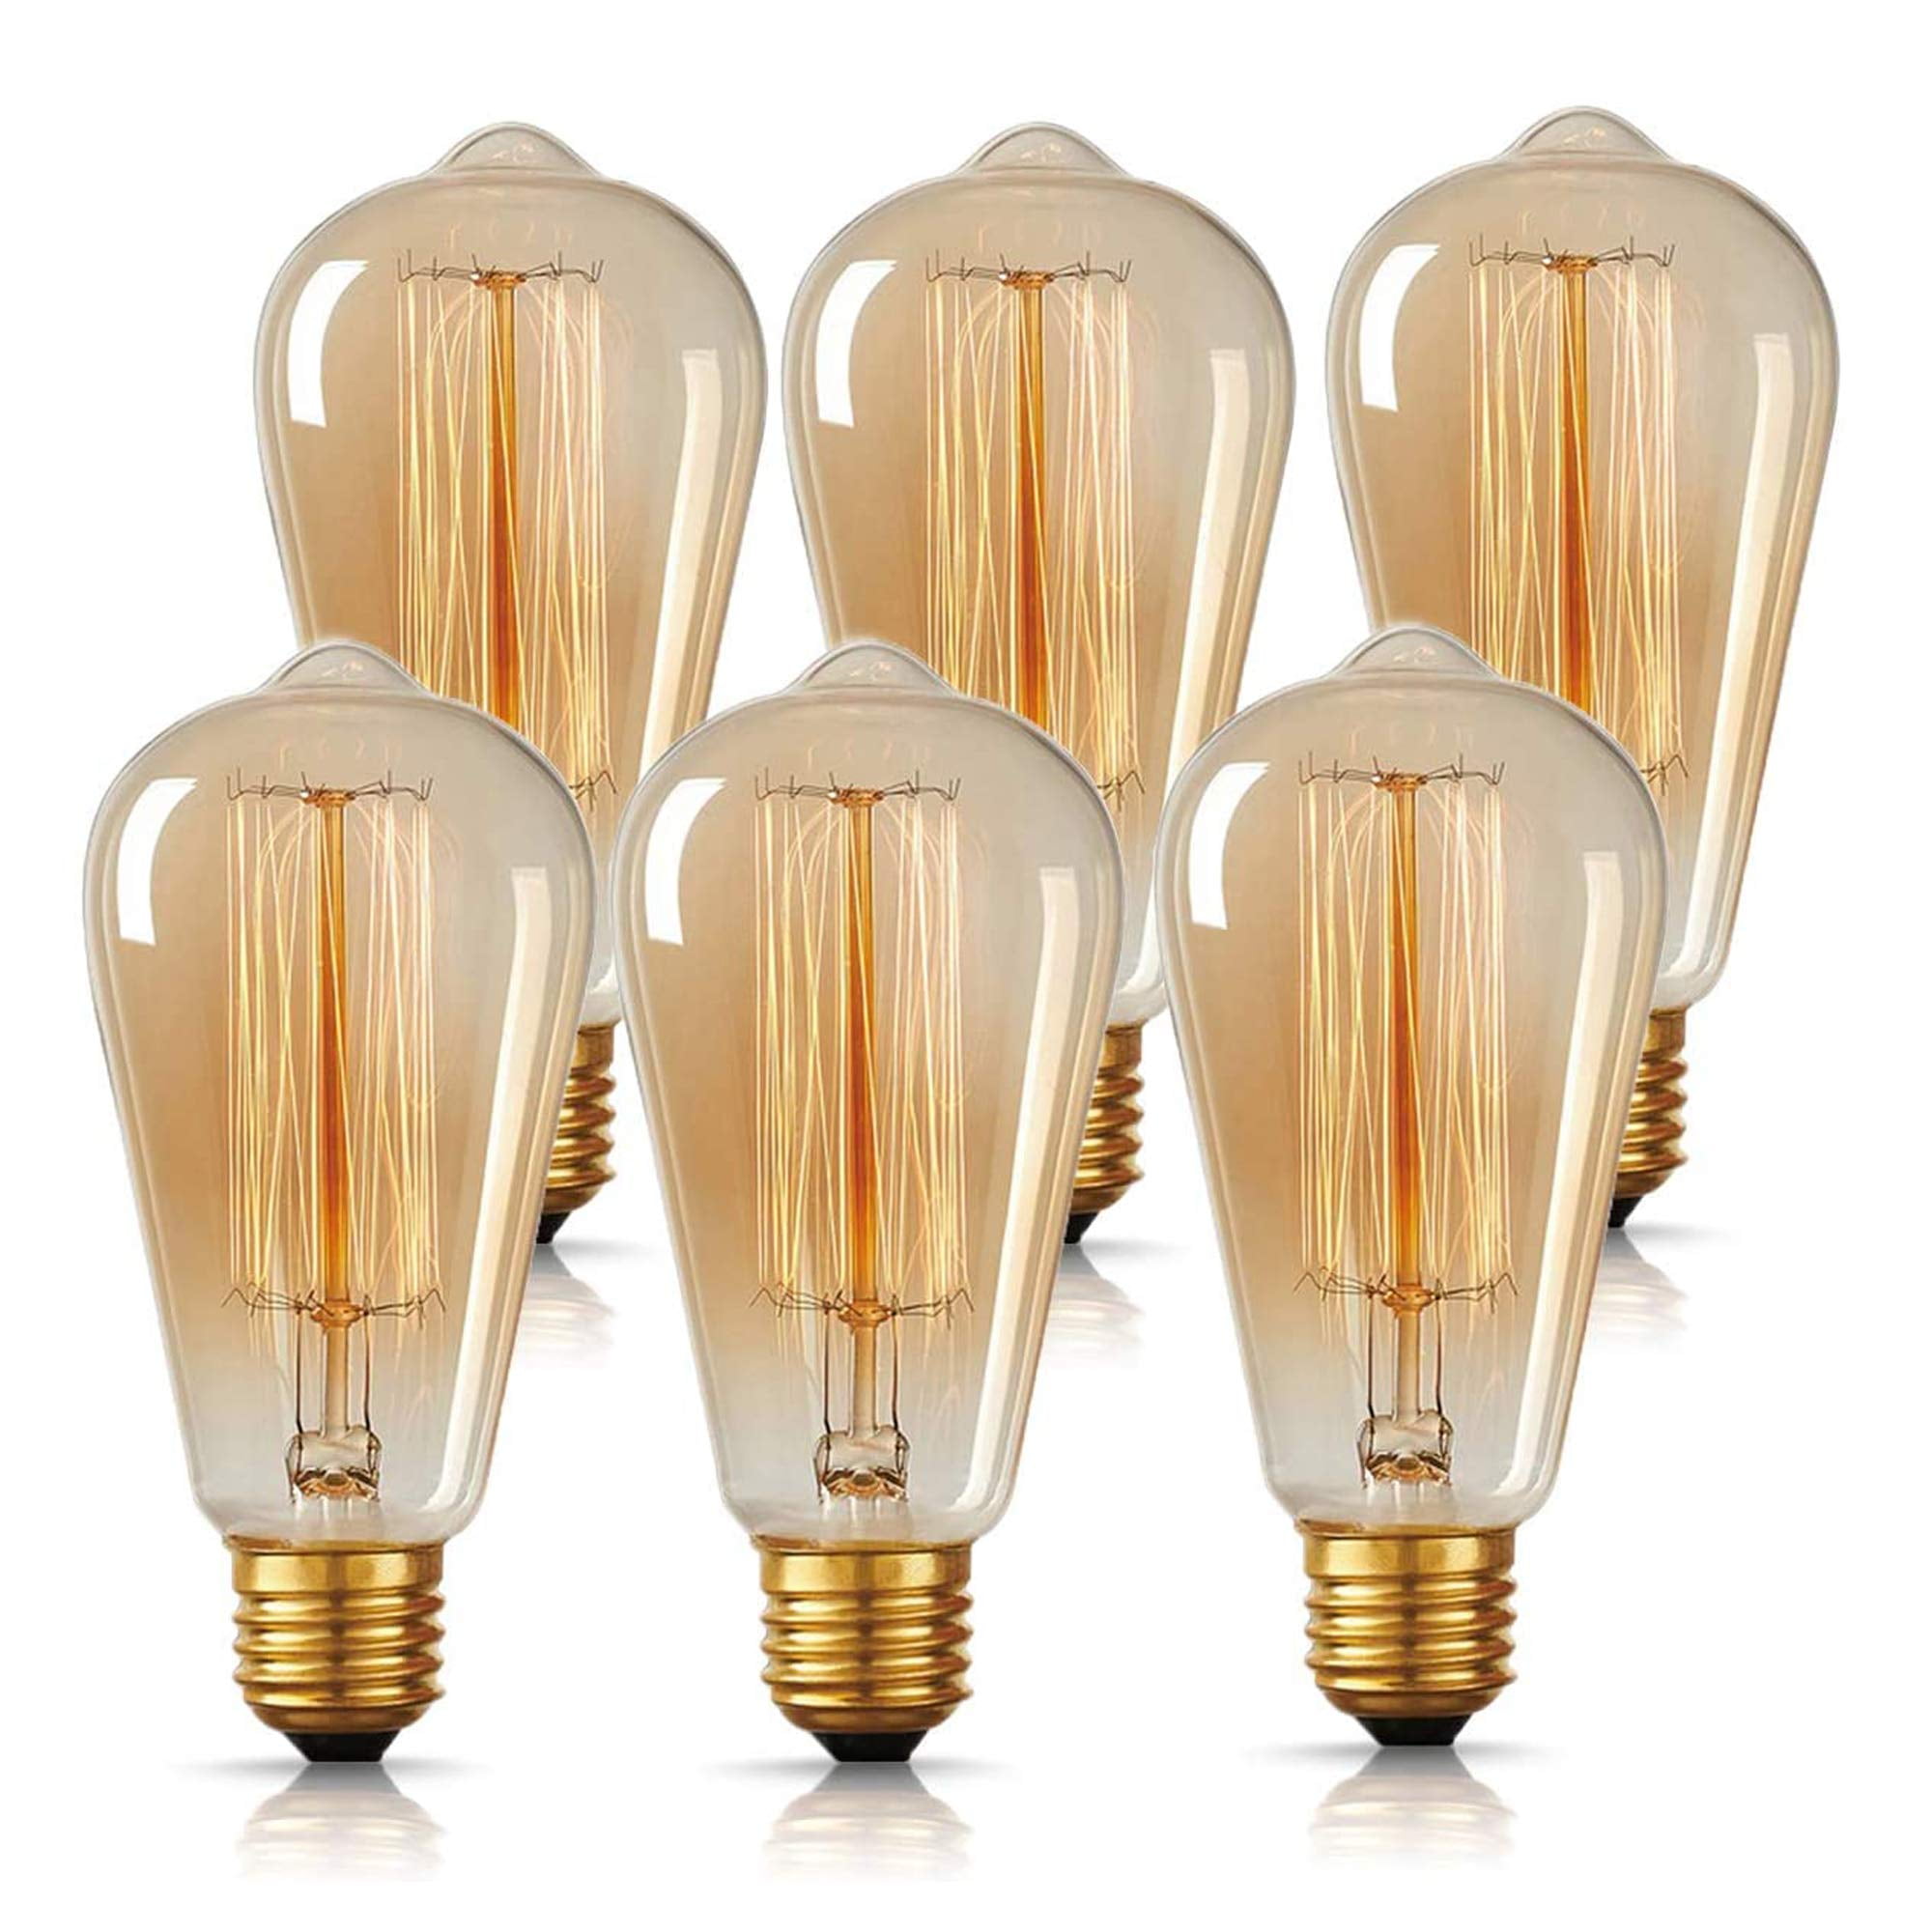 E26 Edison Glass Bulb 40W Retro Industrial Style Home DIY Lighting Dimmable 110V 